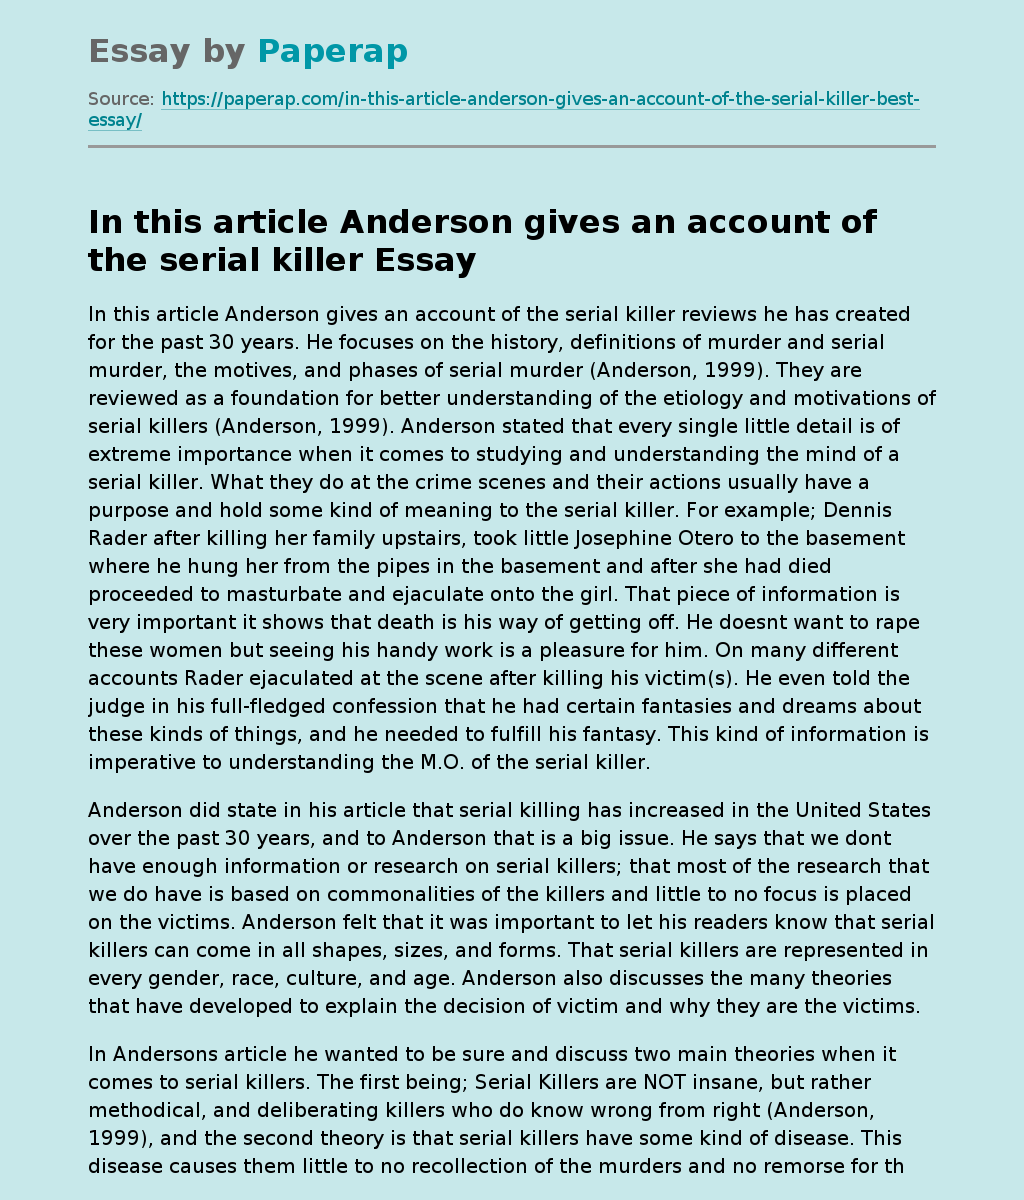 In this article Anderson gives an account of the serial killer